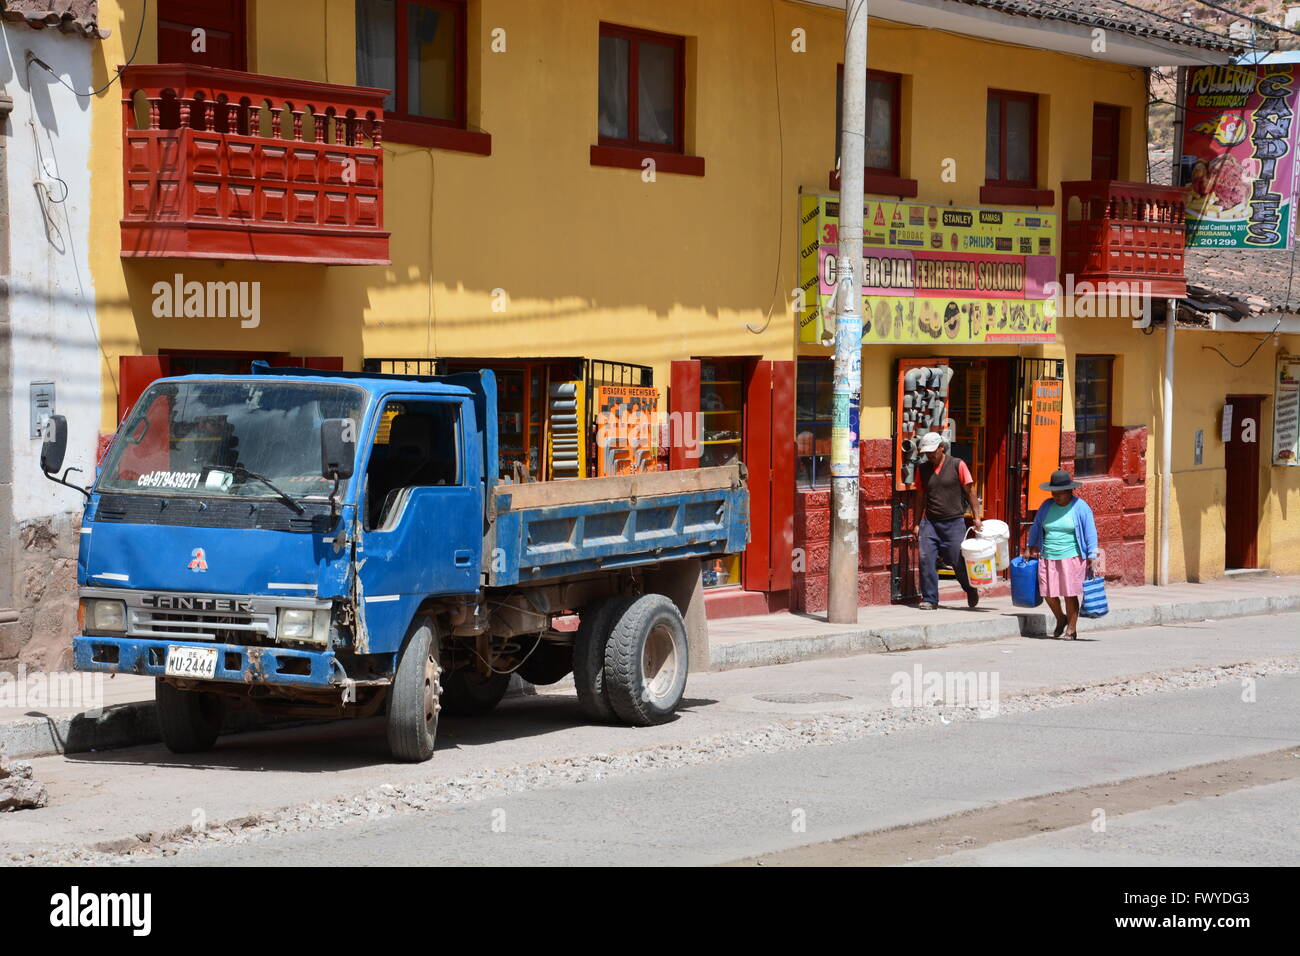 Shops line the Ave. Mariscal Castilla, a main street in the rural town of Urubamba Peru. Stock Photo